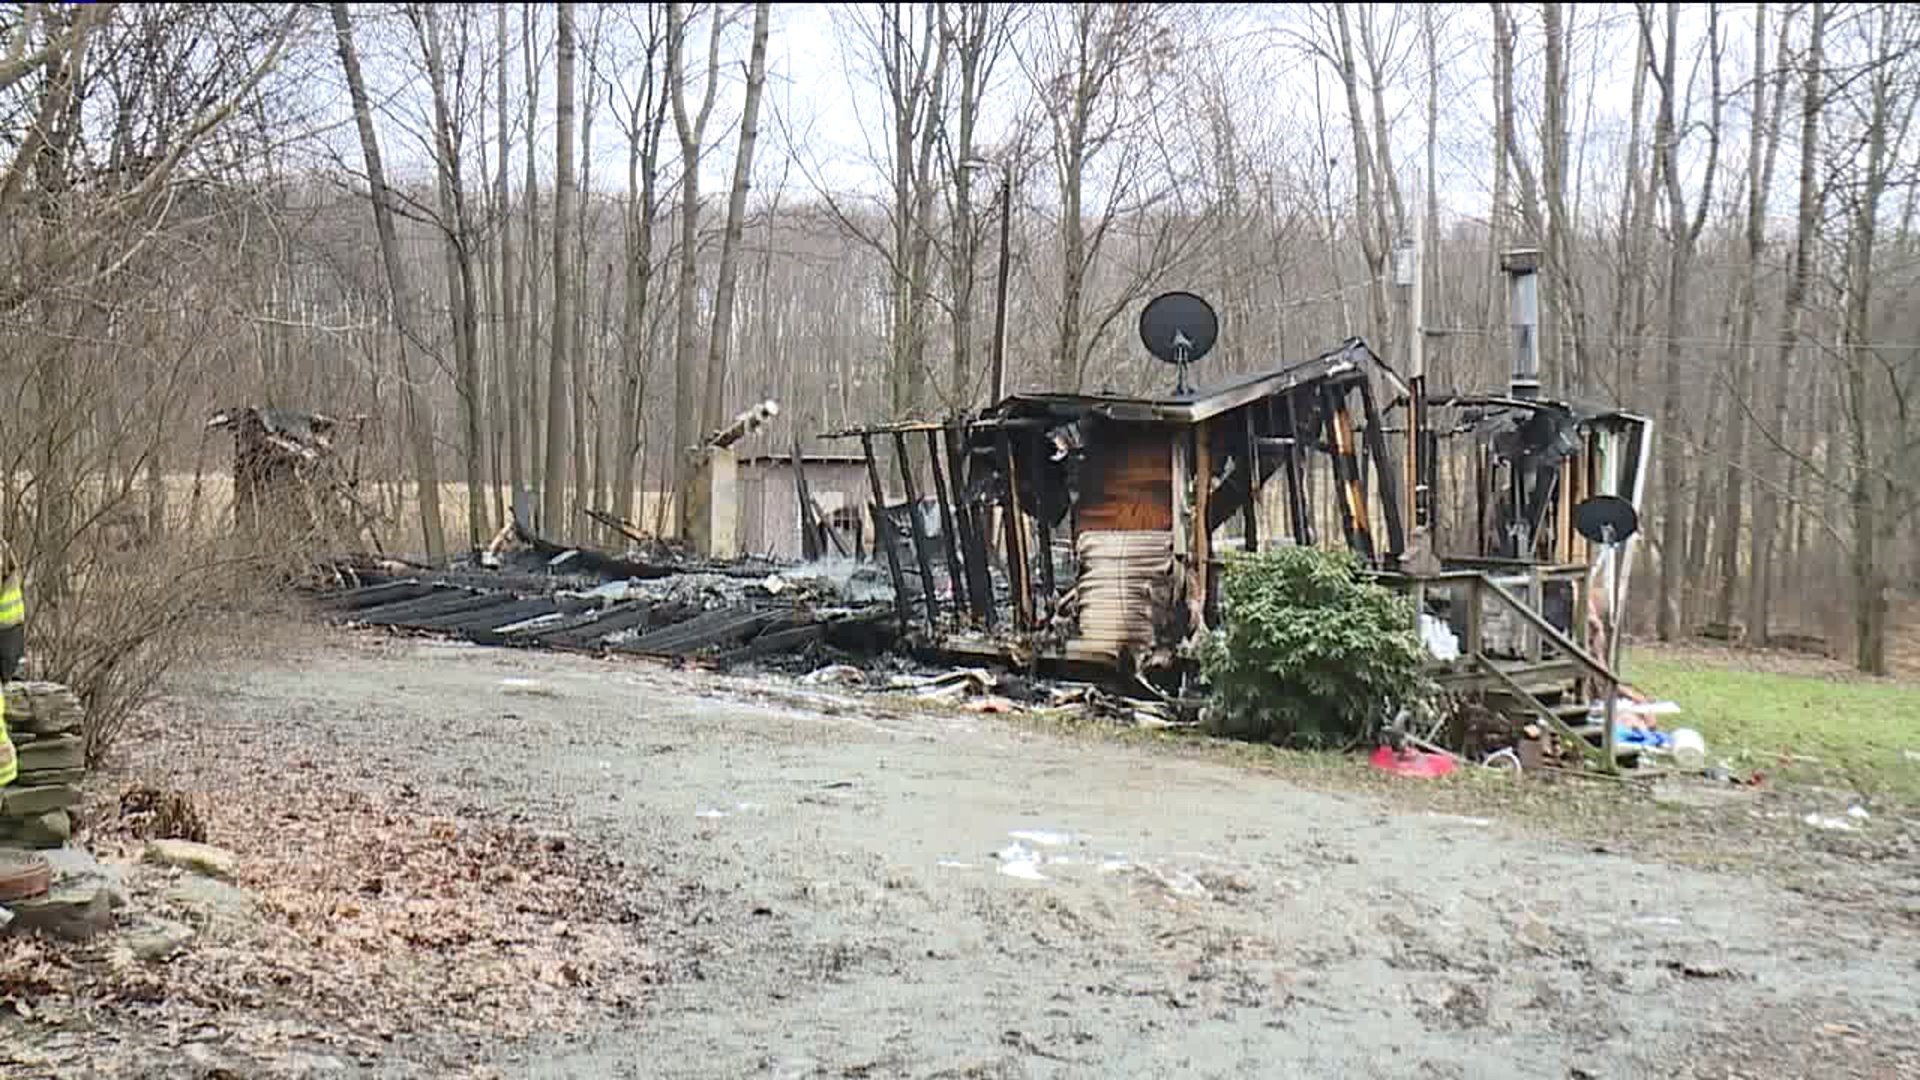 Home in Wyoming County Ruined by Flames